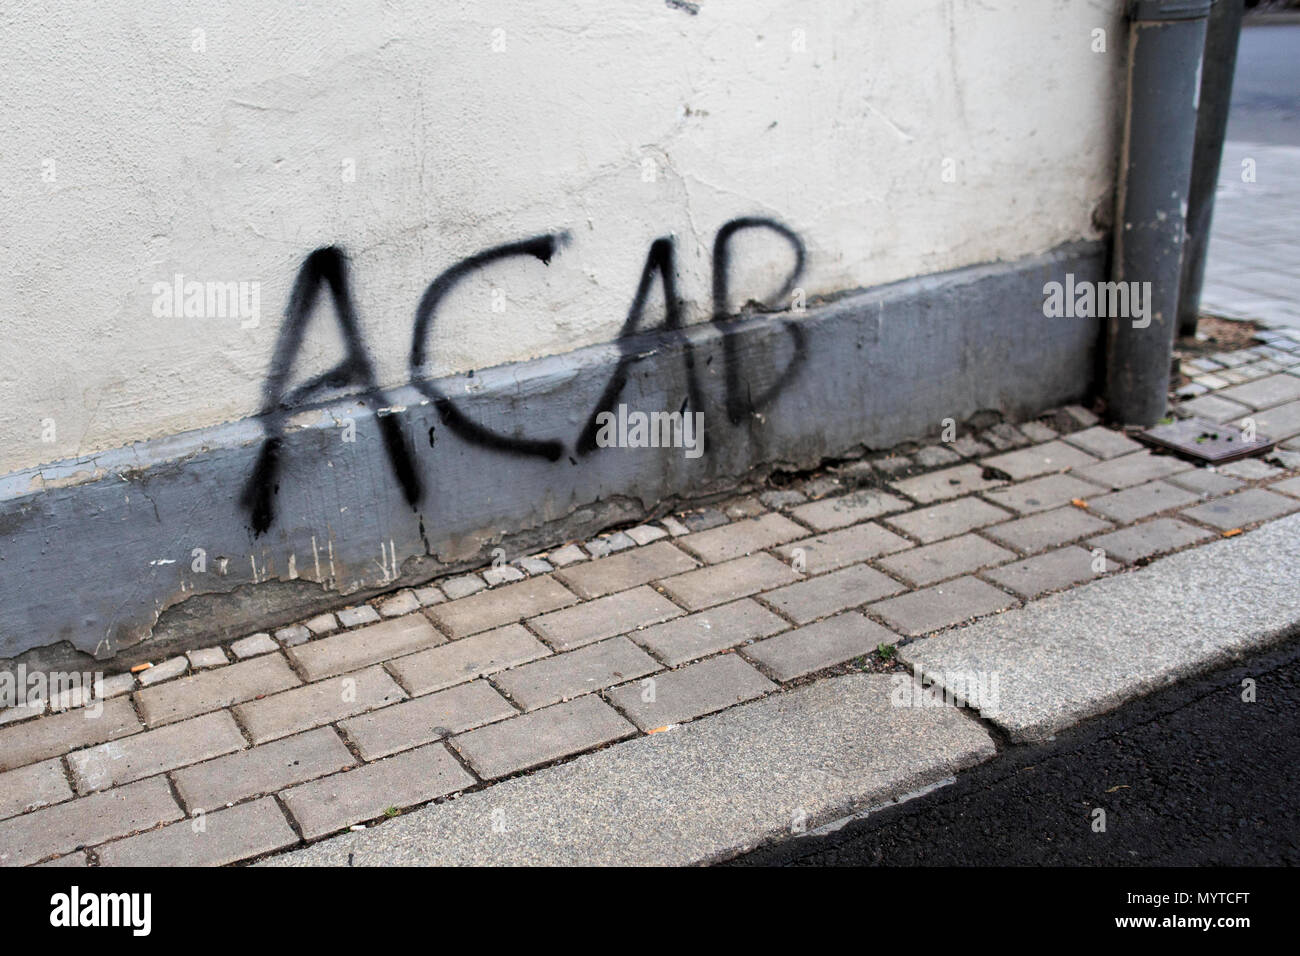 16 May 2018, Germany, Erfurt: A house' facade in old town Erfurt spray painted with the ACAB graffitti. ACAB stands for 'All Cops Are Bastards' and is aimed against police officers. Photo: Carsten Koall/dpa Stock Photo